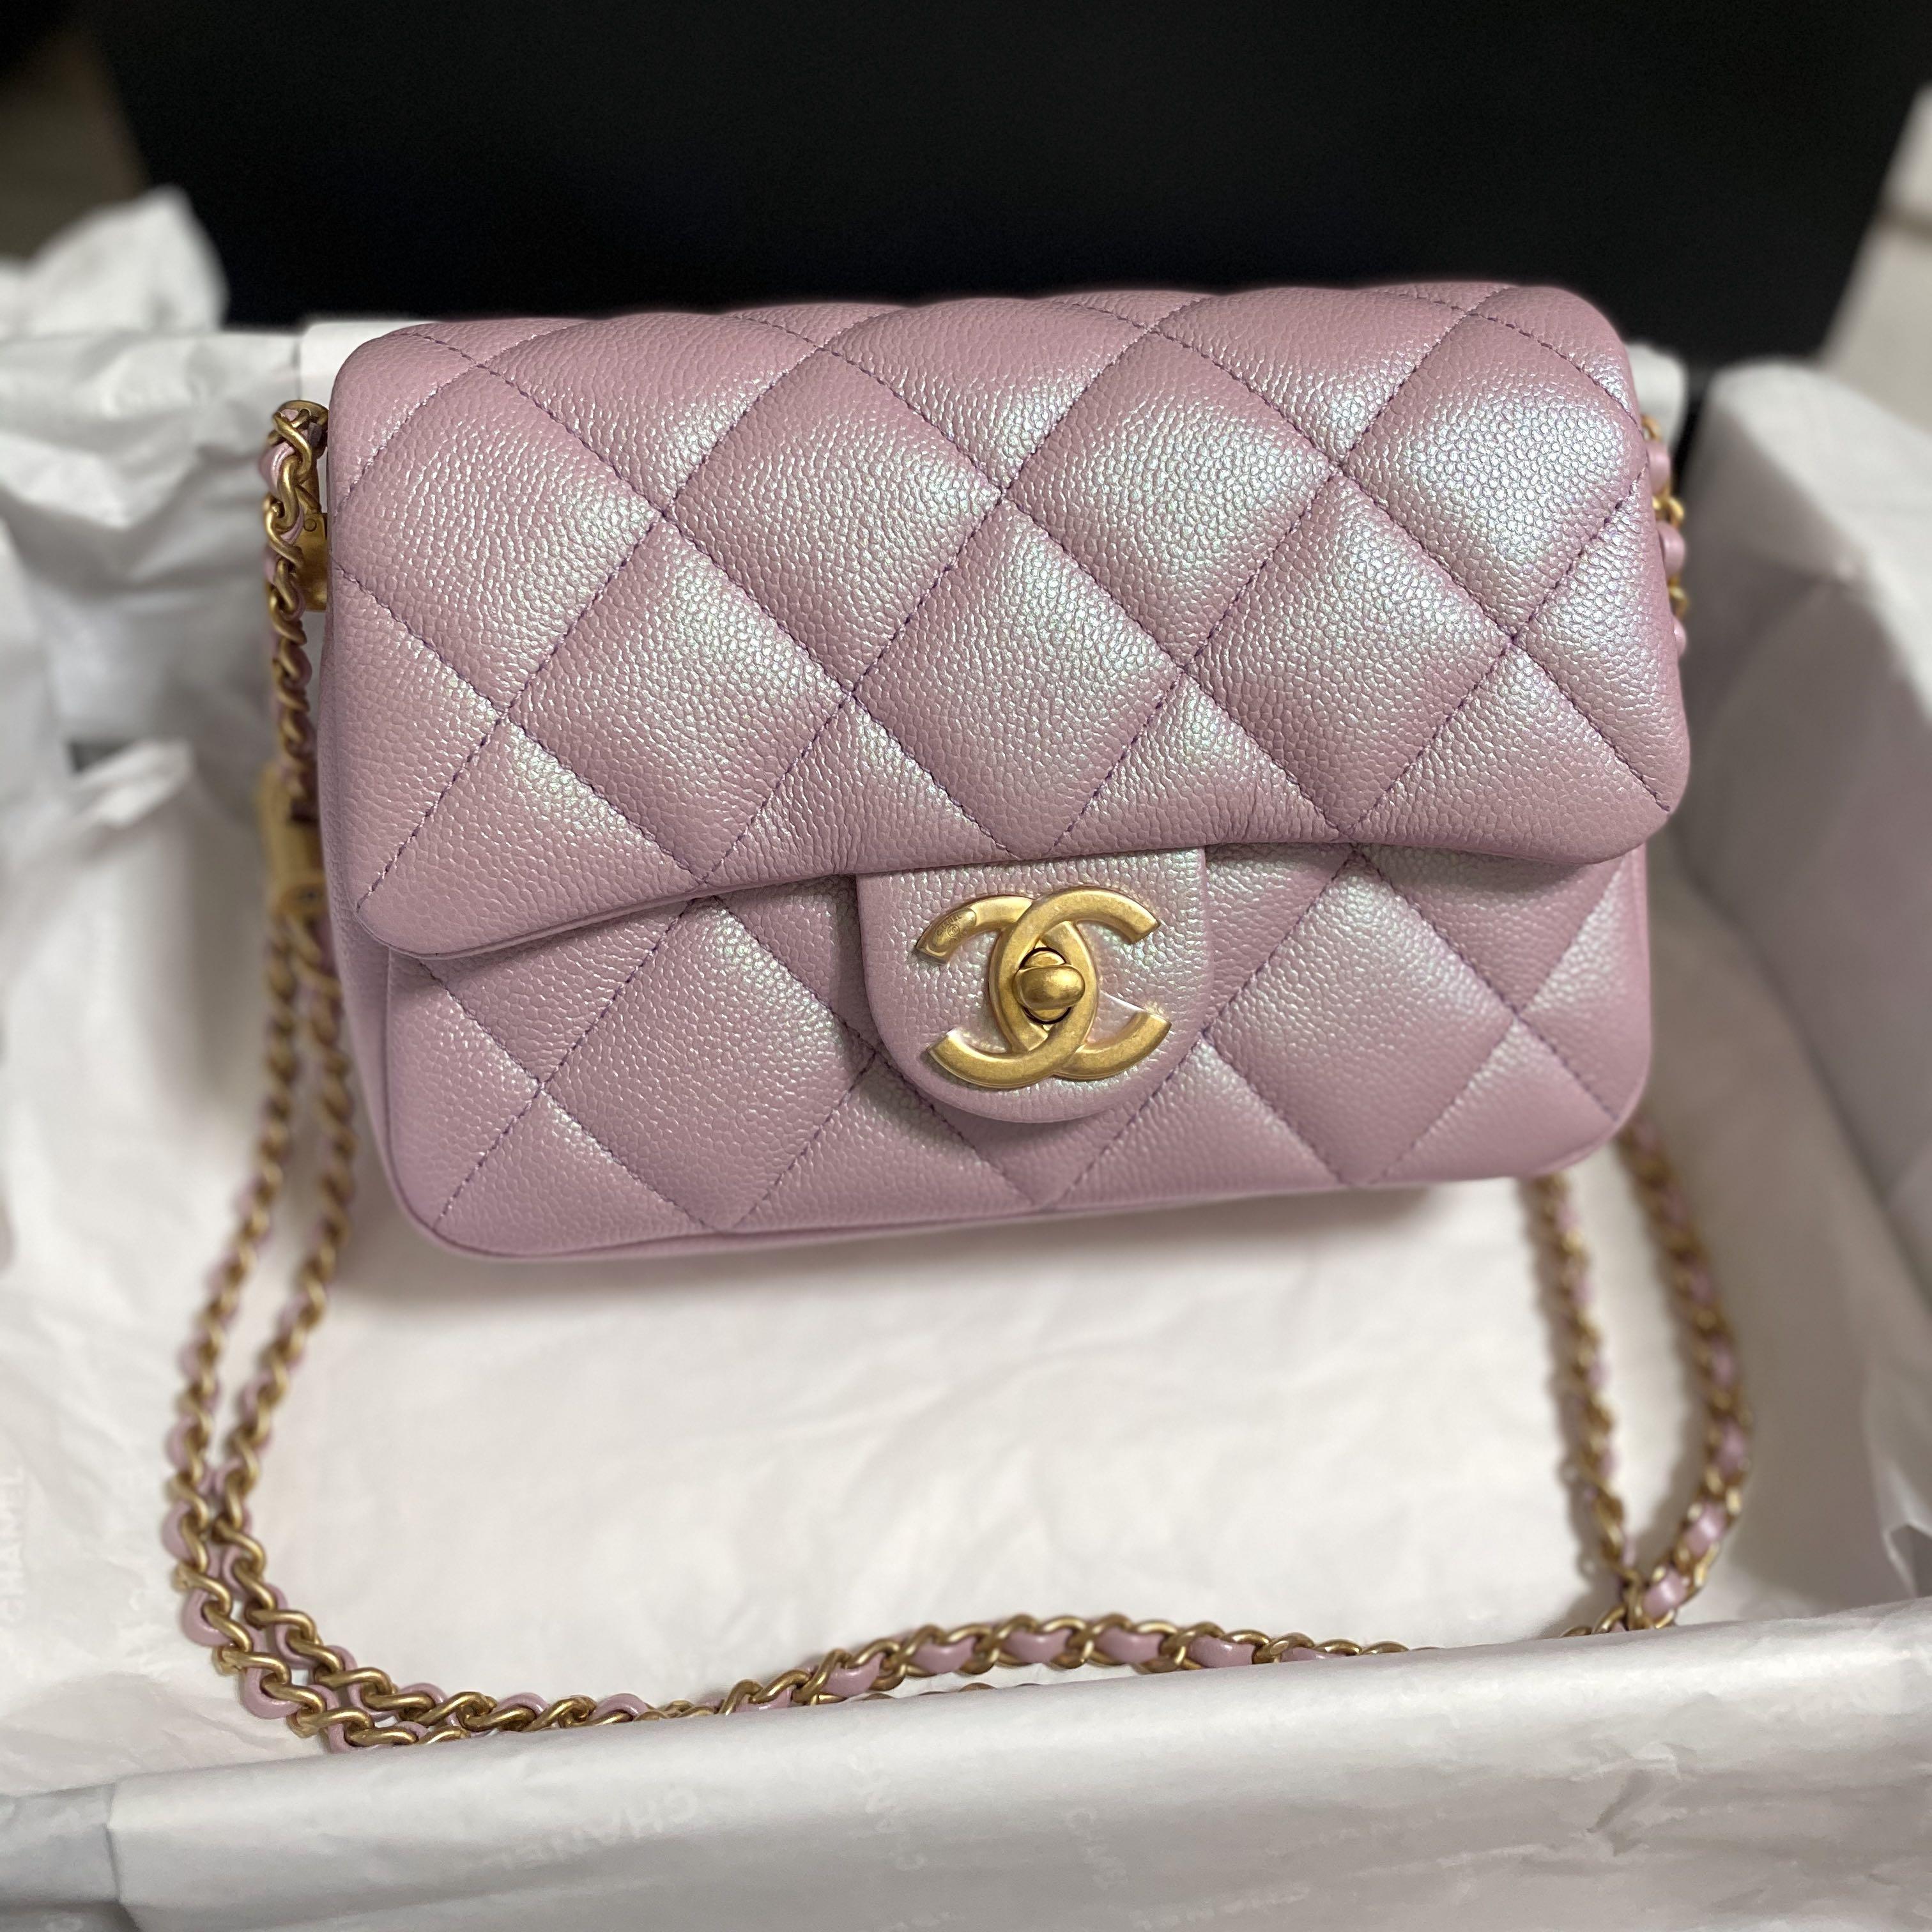 Chanel Quilted My Perfect Mini Iridescent Blue Caviar Aged Gold Hardwa –  Coco Approved Studio